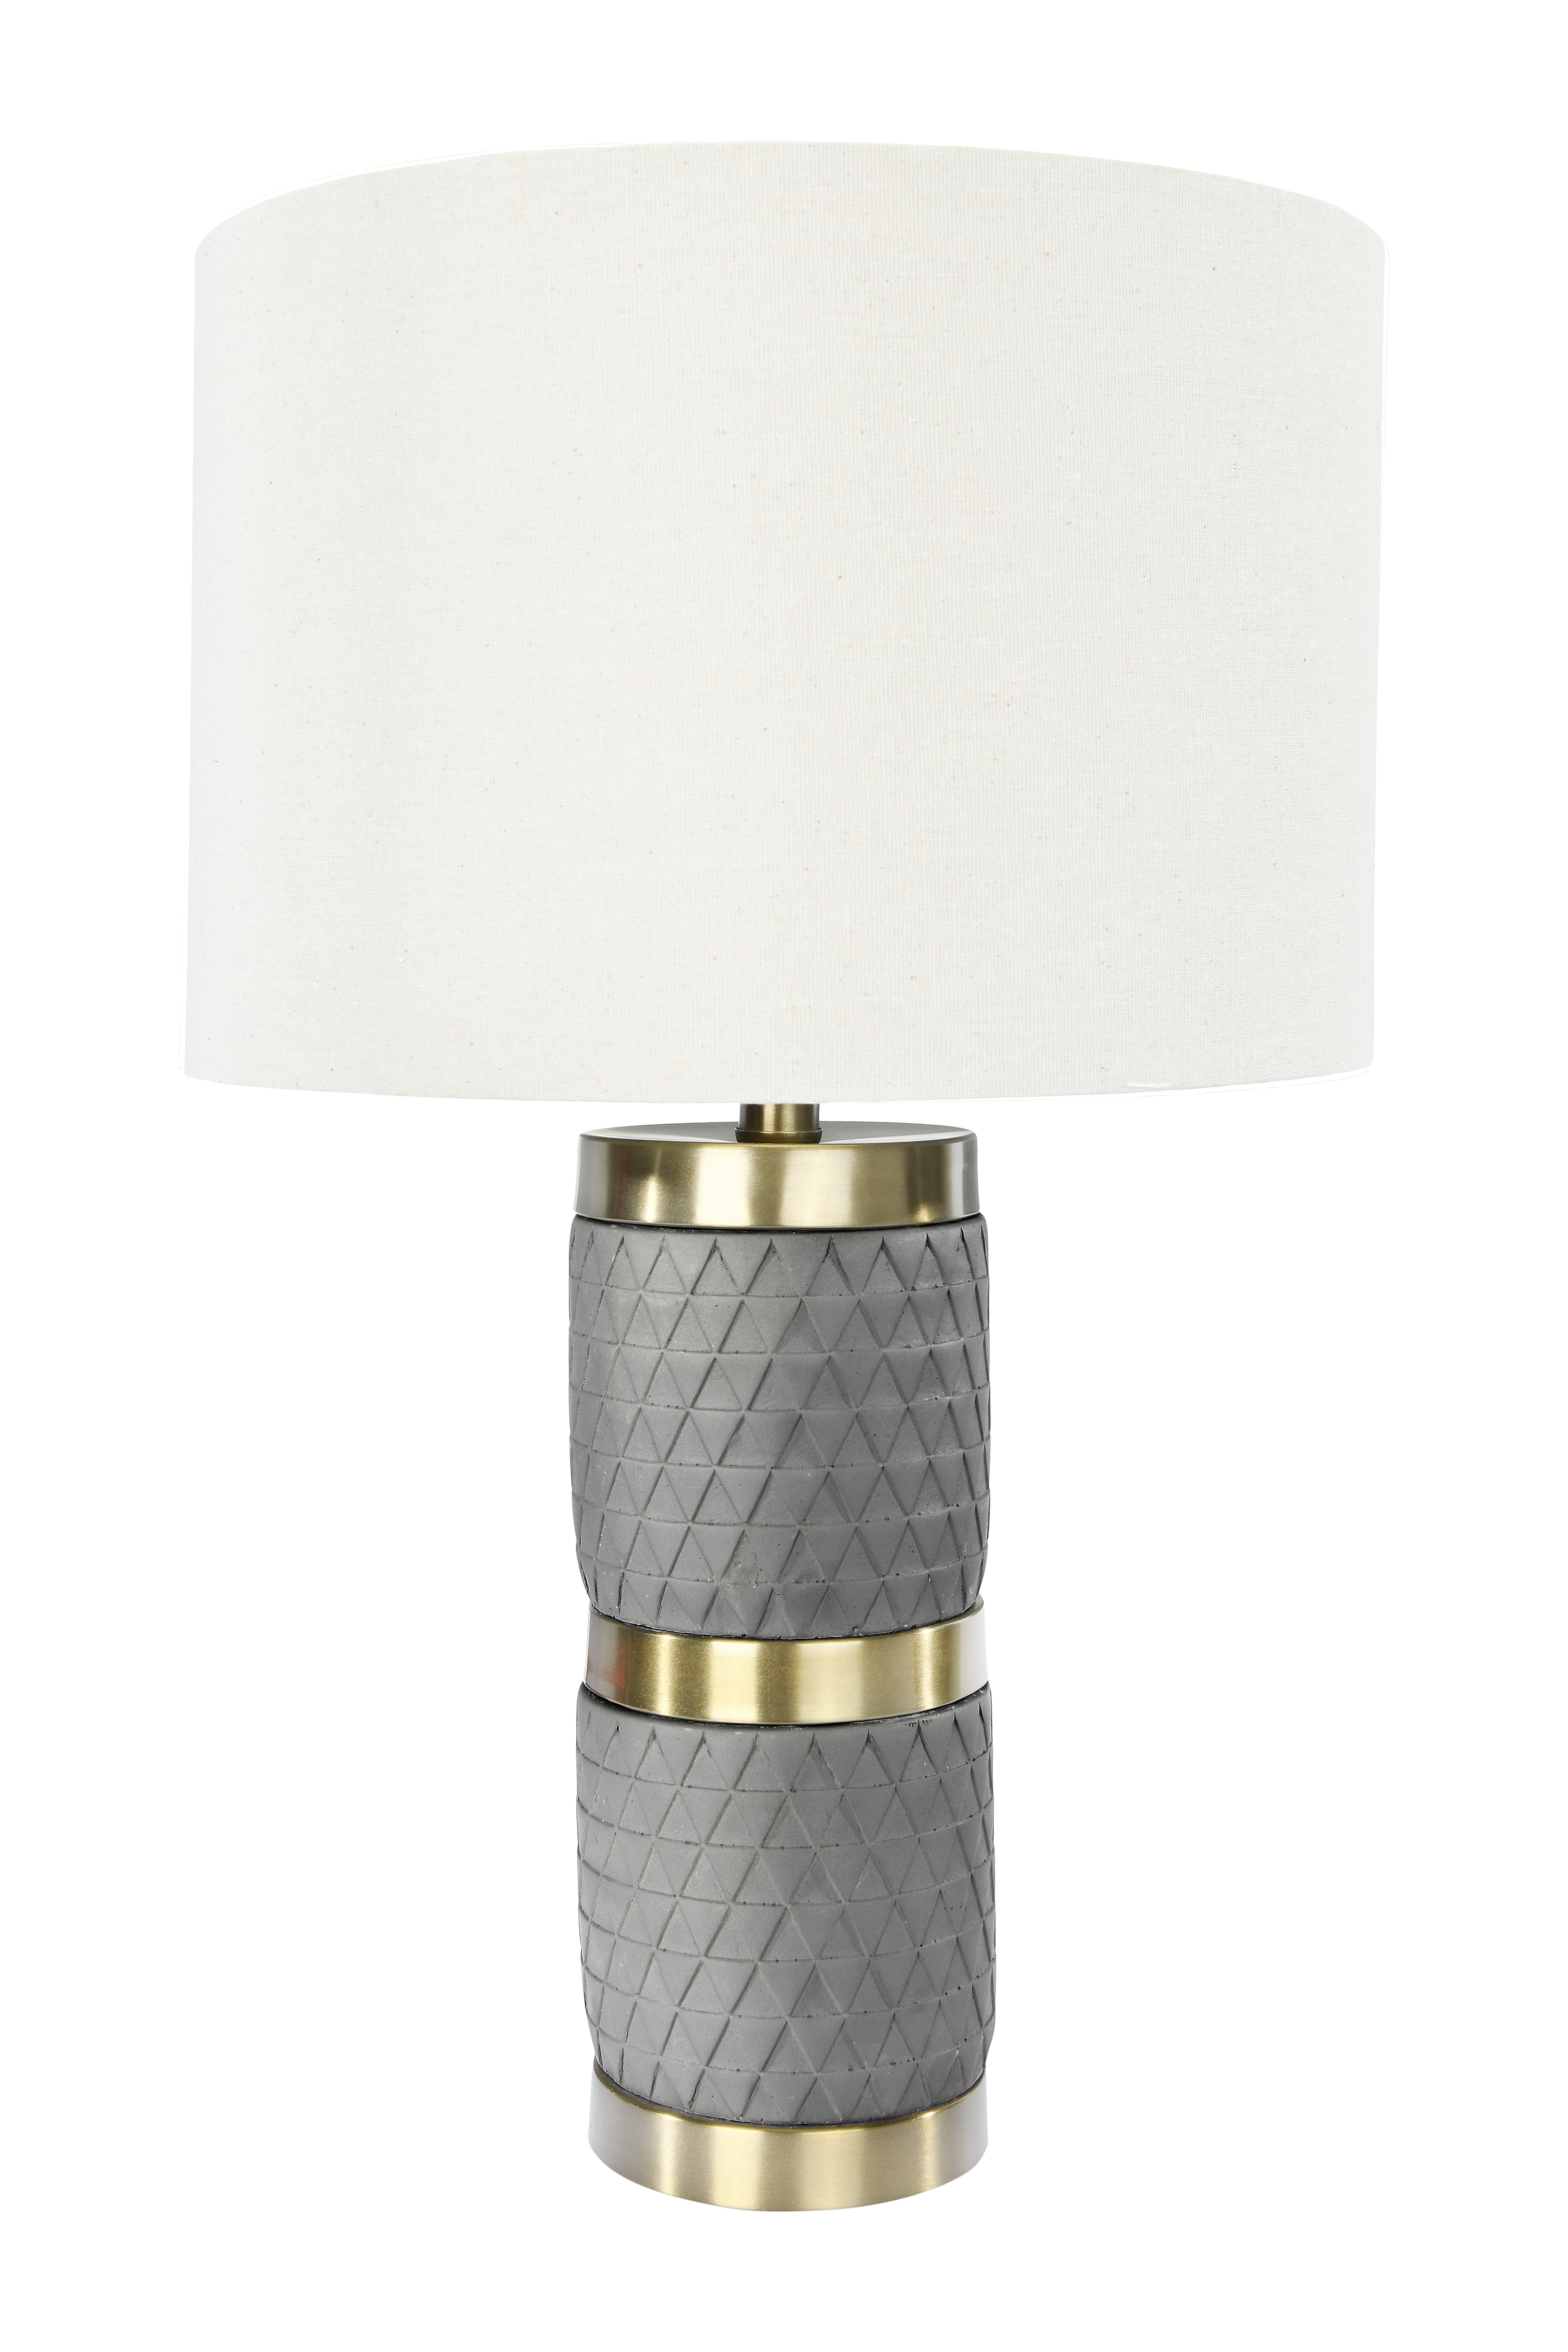 Raw Concrete Table Lamp with Imprinted Diamond Design and Metal Accents - Image 0